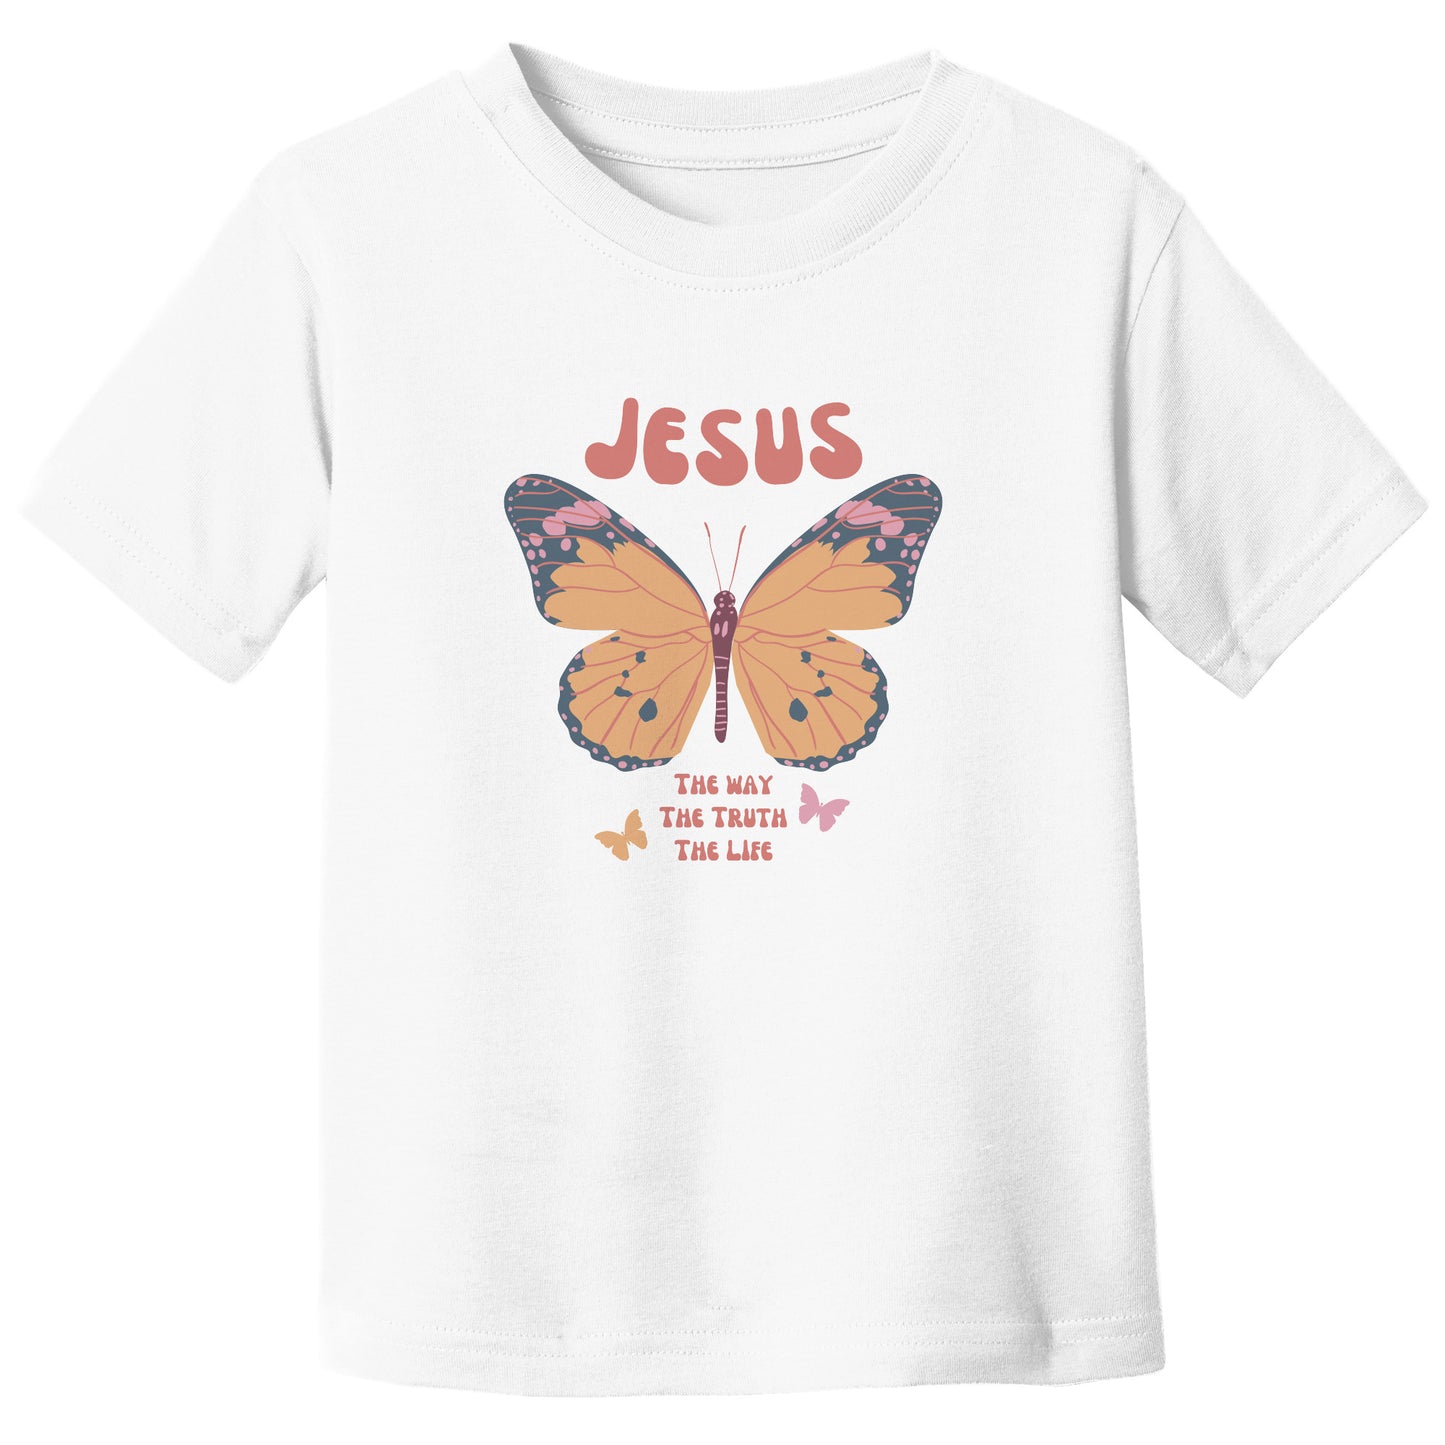 Jesus The Way The Truth The Lie Toddler T-Shirt